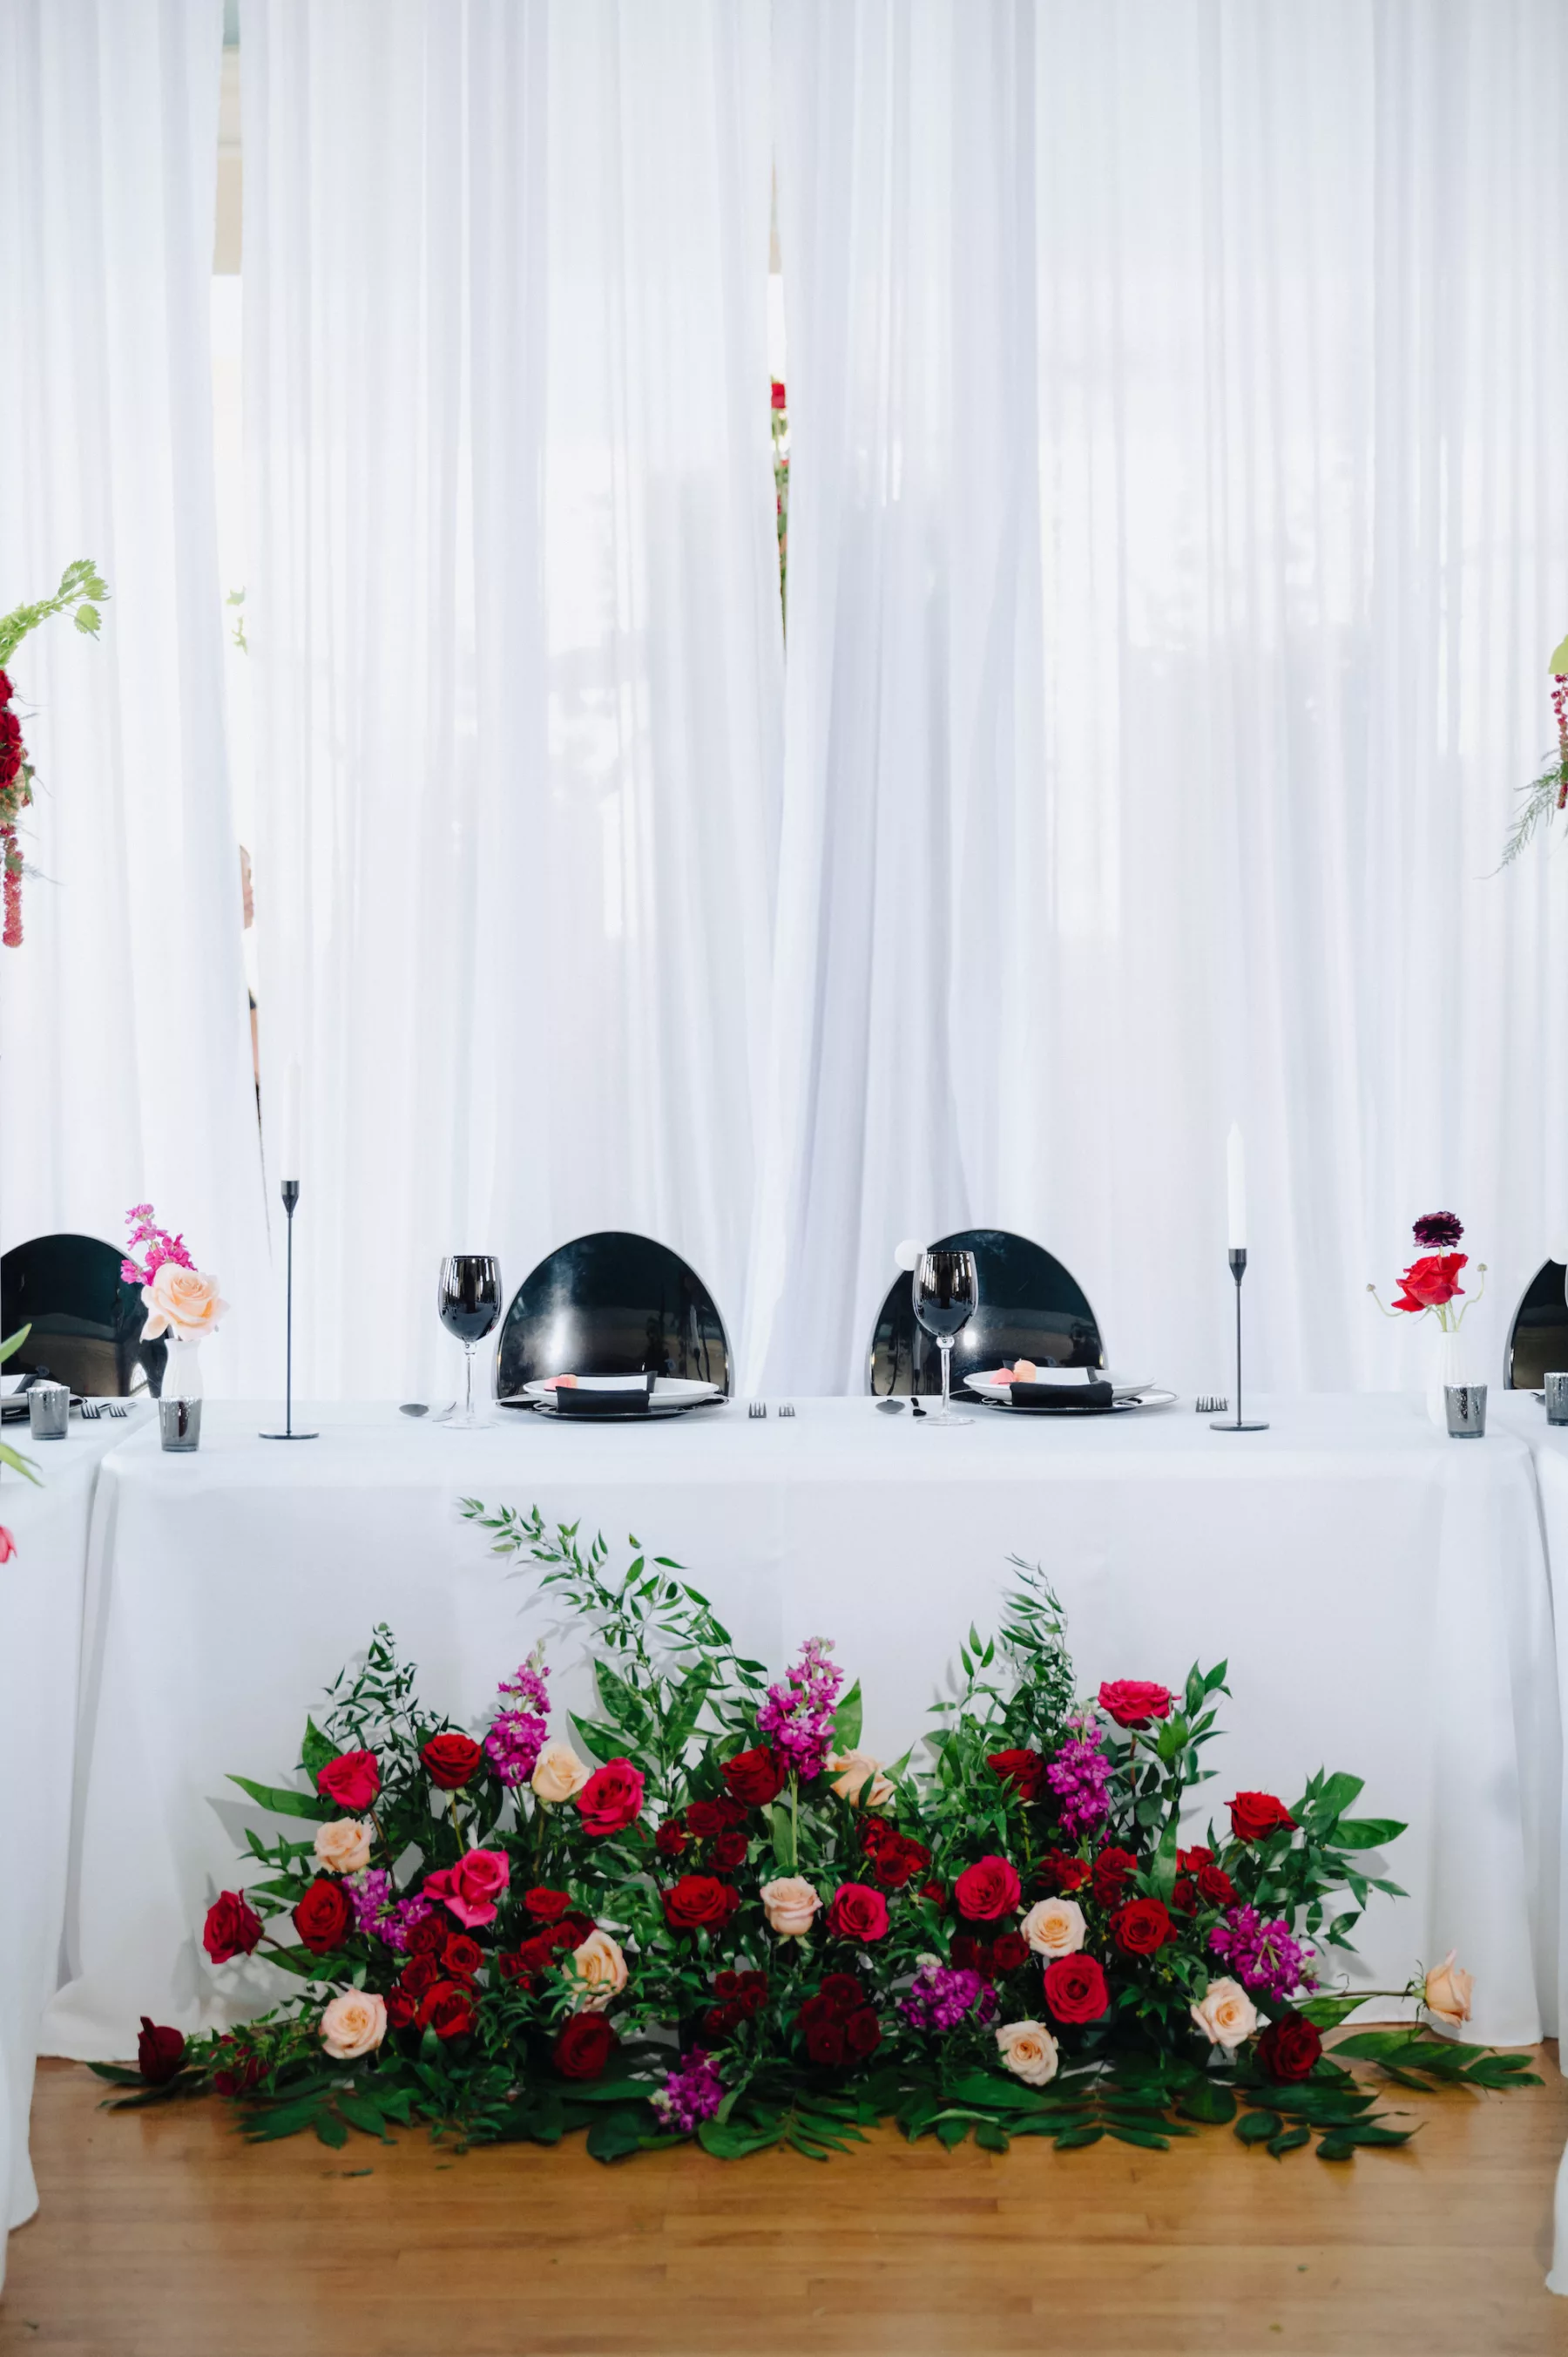 Modern Black and Pink Italian Inspired Wedding Reception | U-Shaped Table Setting | Greenery, Pink and Red Rose Flower Arrangement Decor Ideas | Tampa Bay Florist Save The Date Florida